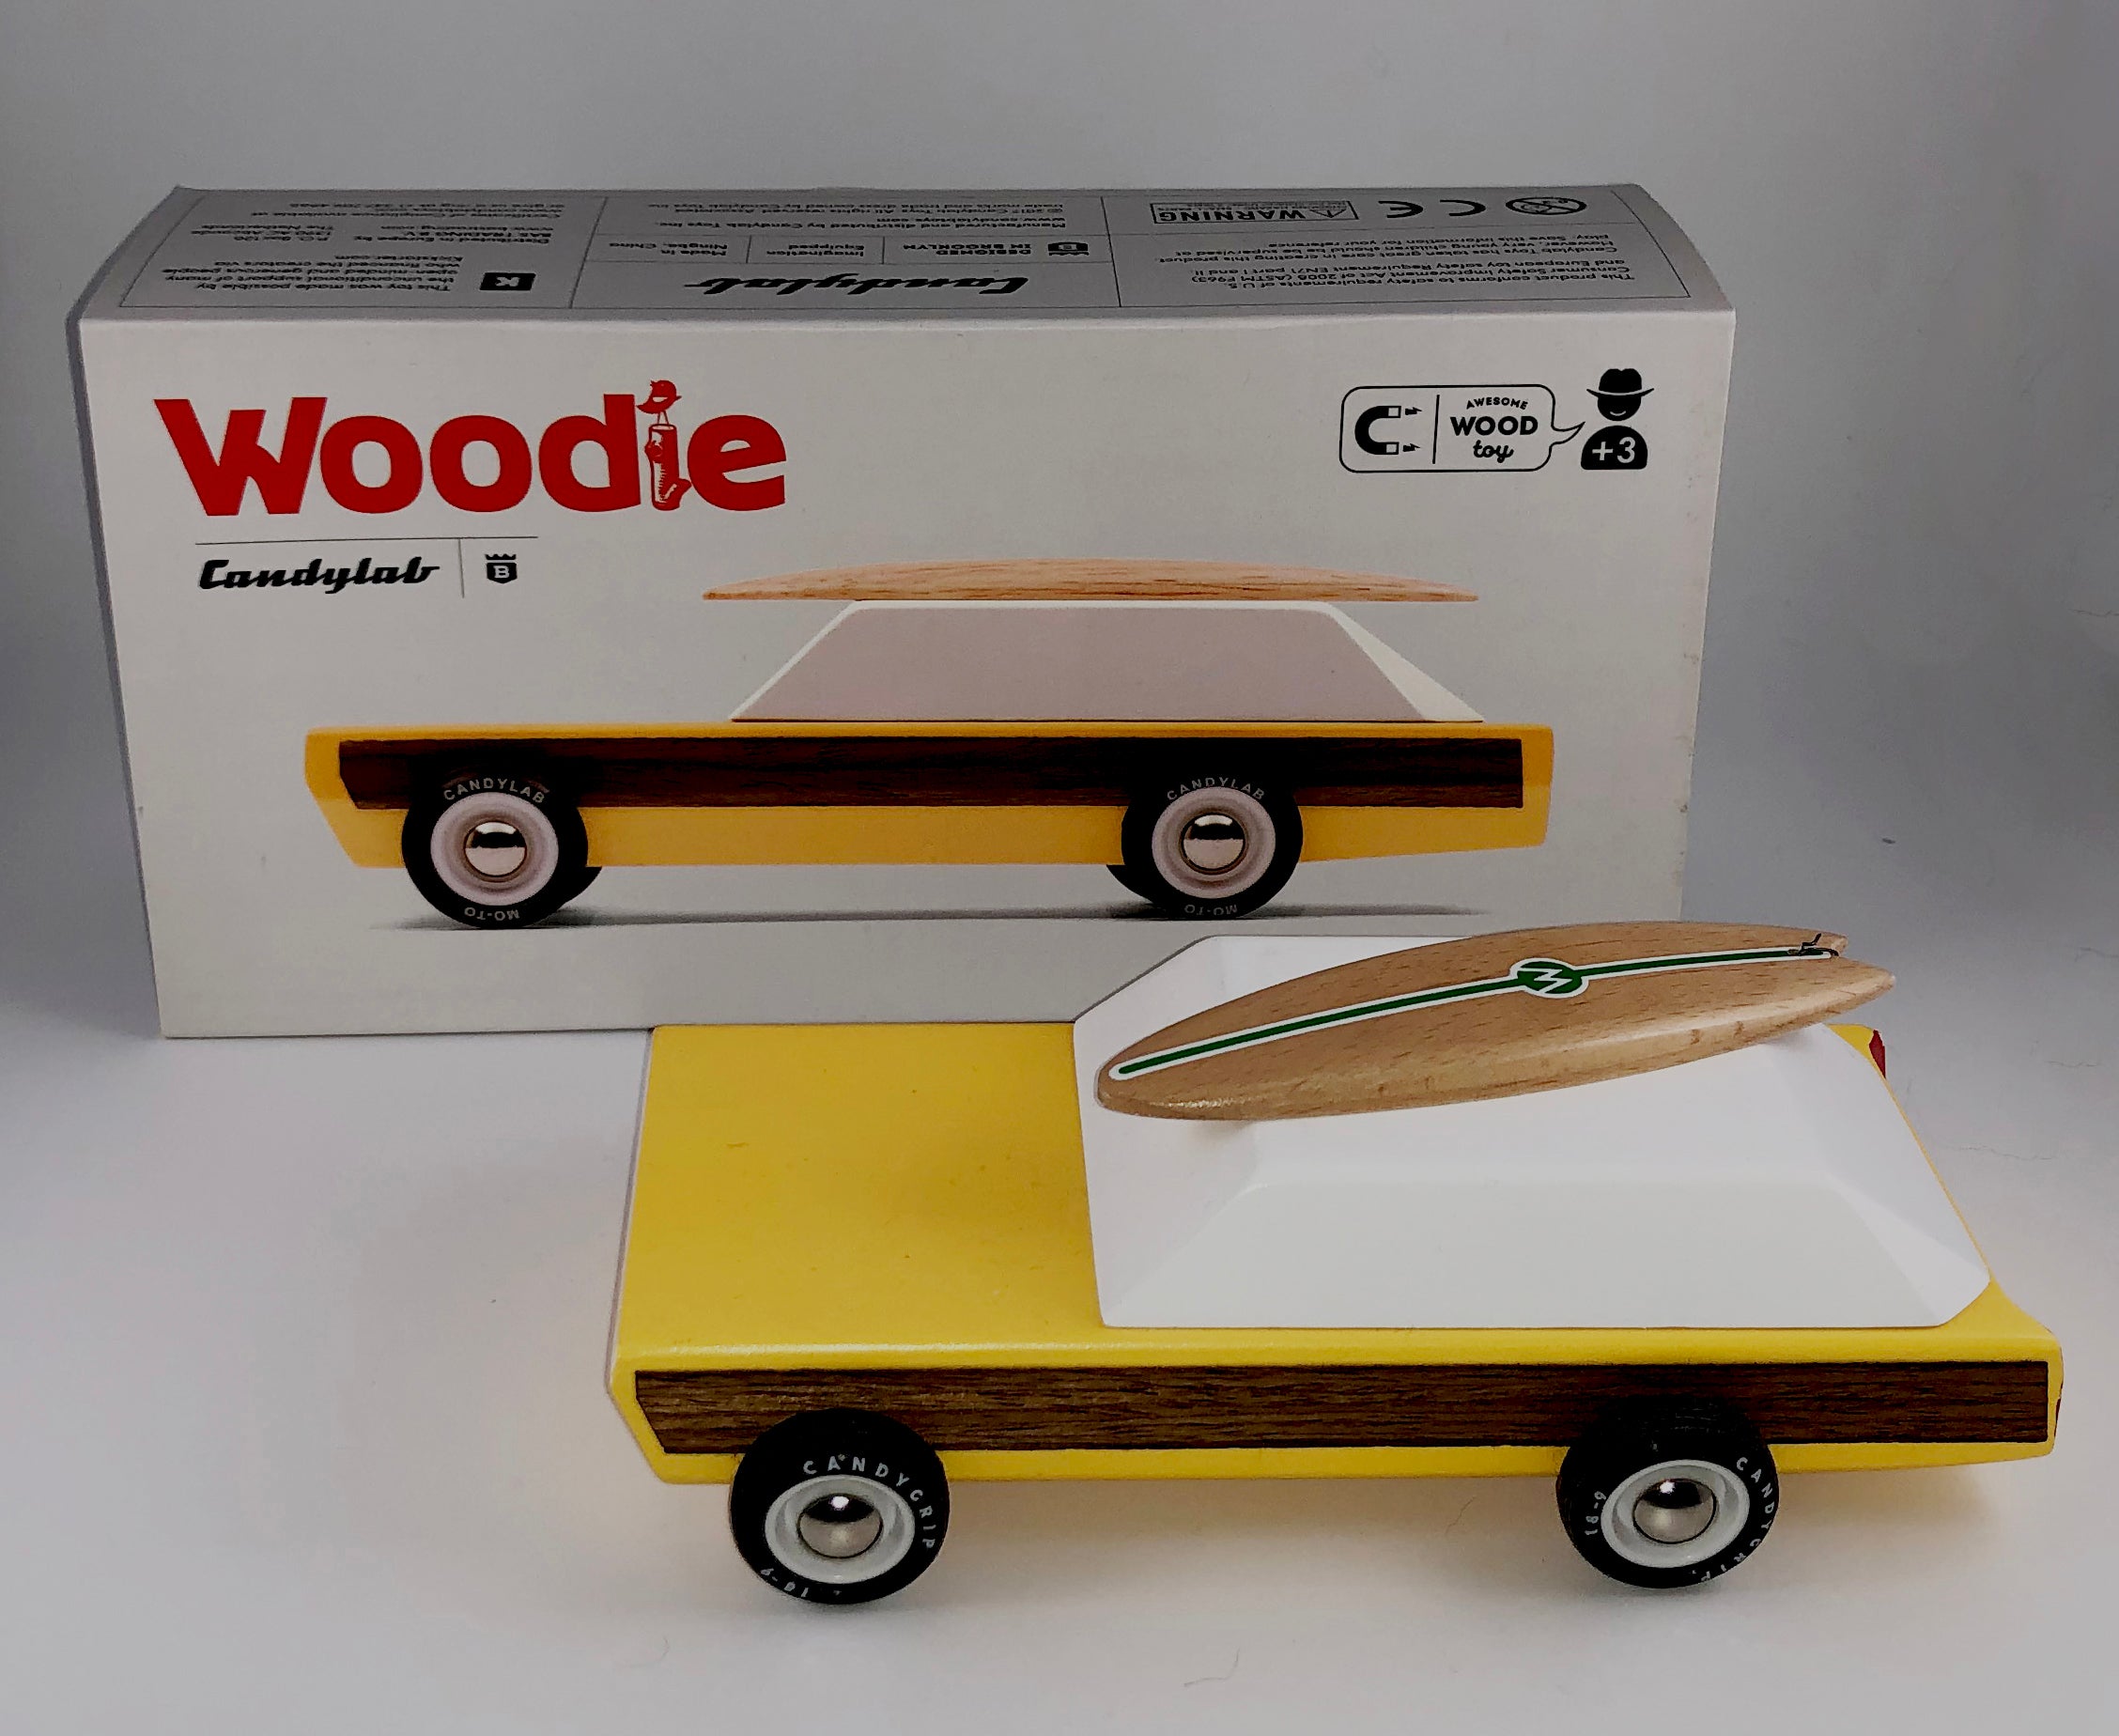 A cultural icon in its own right, this woodie has real veneer side panels and magnetic attachments. A tow hitch and a surfboard roof "rack".